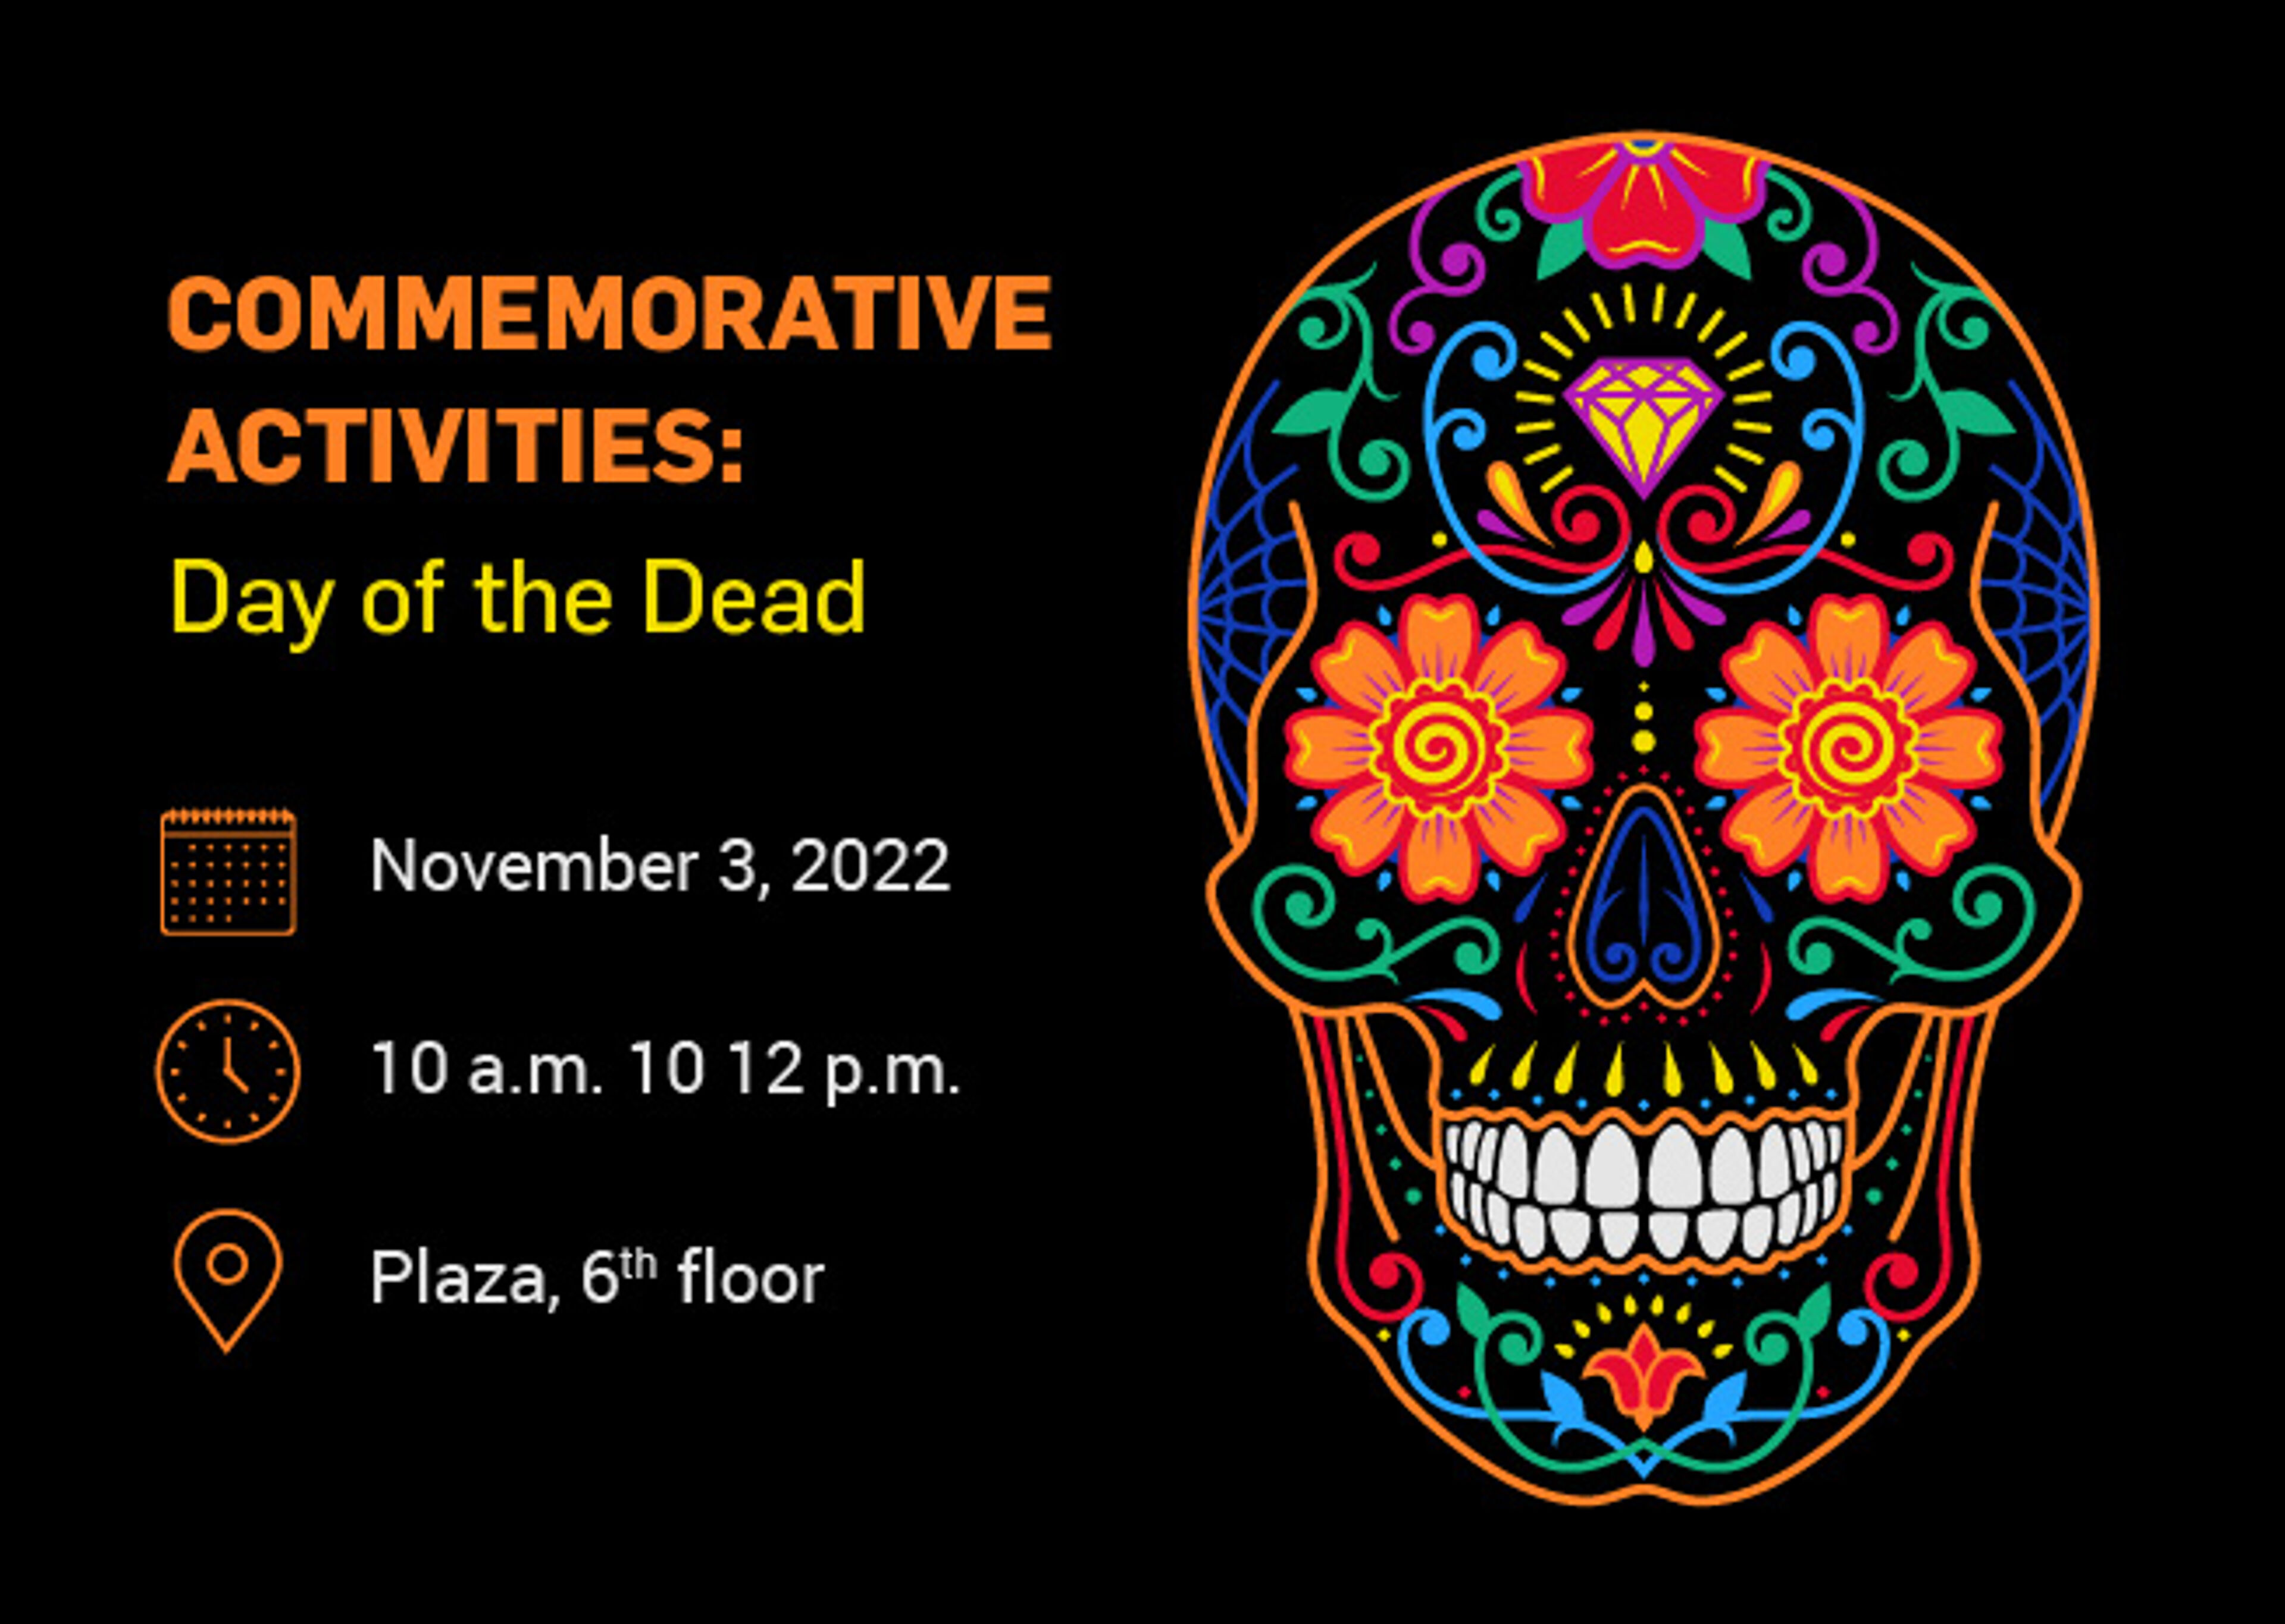 Announcement for Day of the Dead commemorative activities on November 3, 2022, from 10 a.m. to 12 p.m. at Plaza, 6th floor.